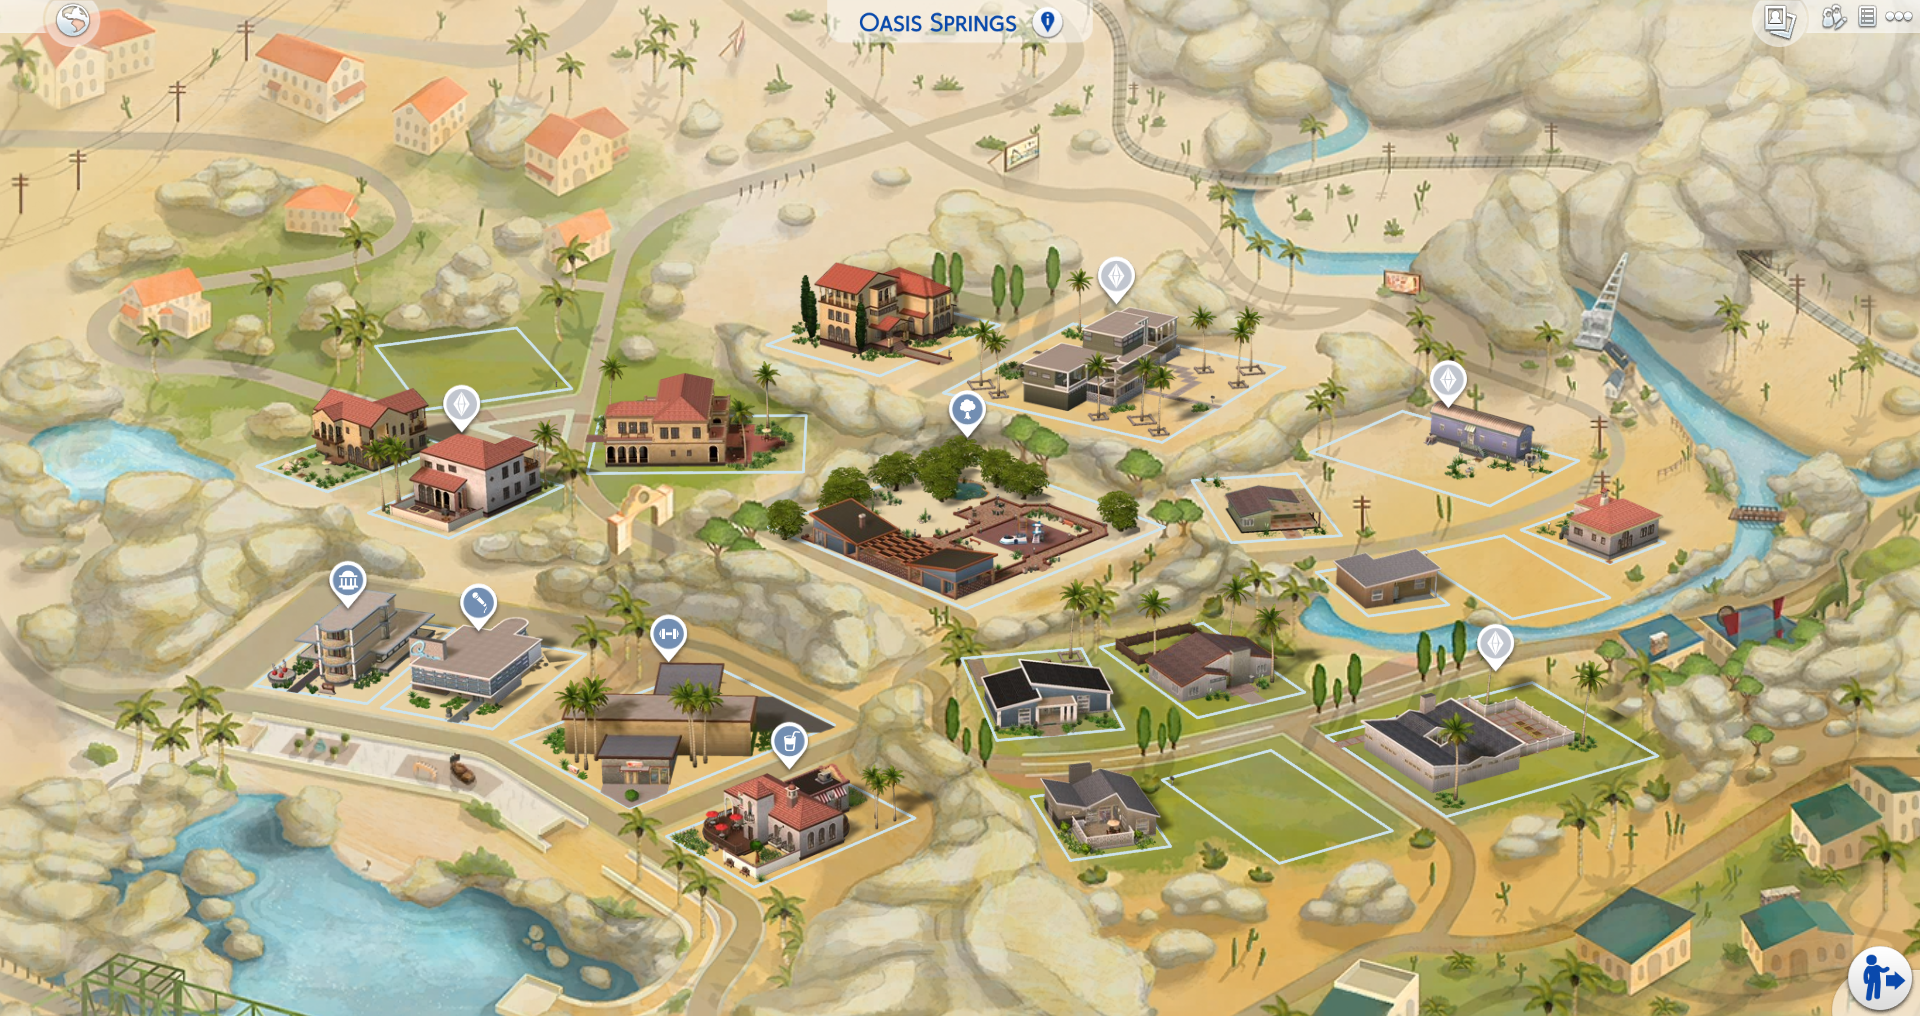 Sims 4 Map Replacement - Real Map Of Earth